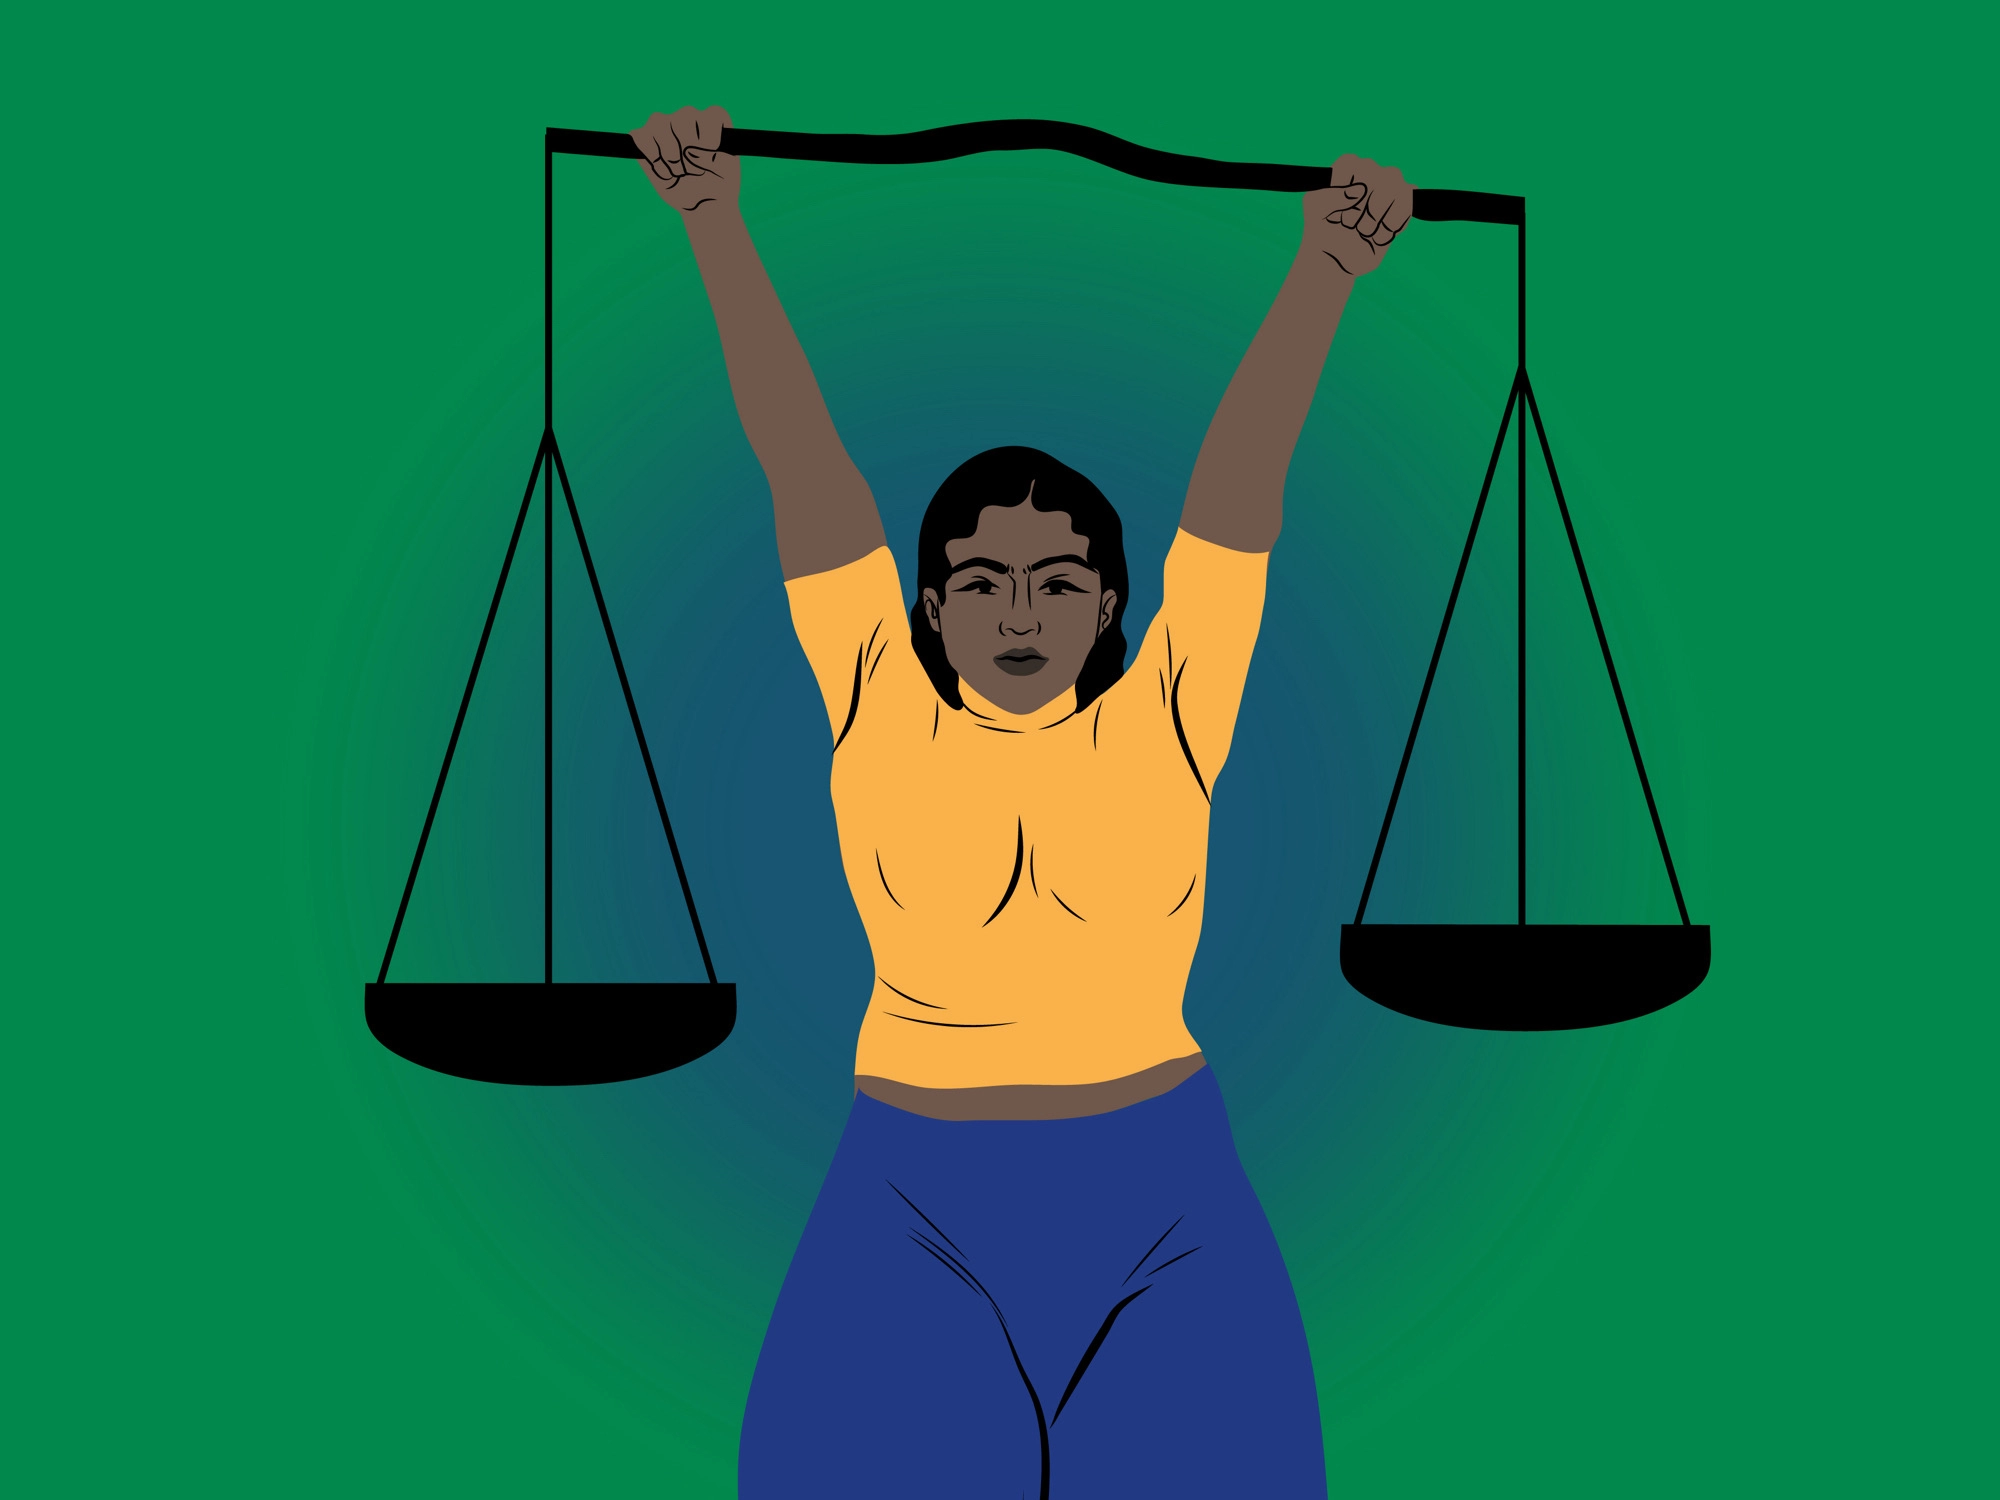 Illustration of a woman holding the scales of justice.